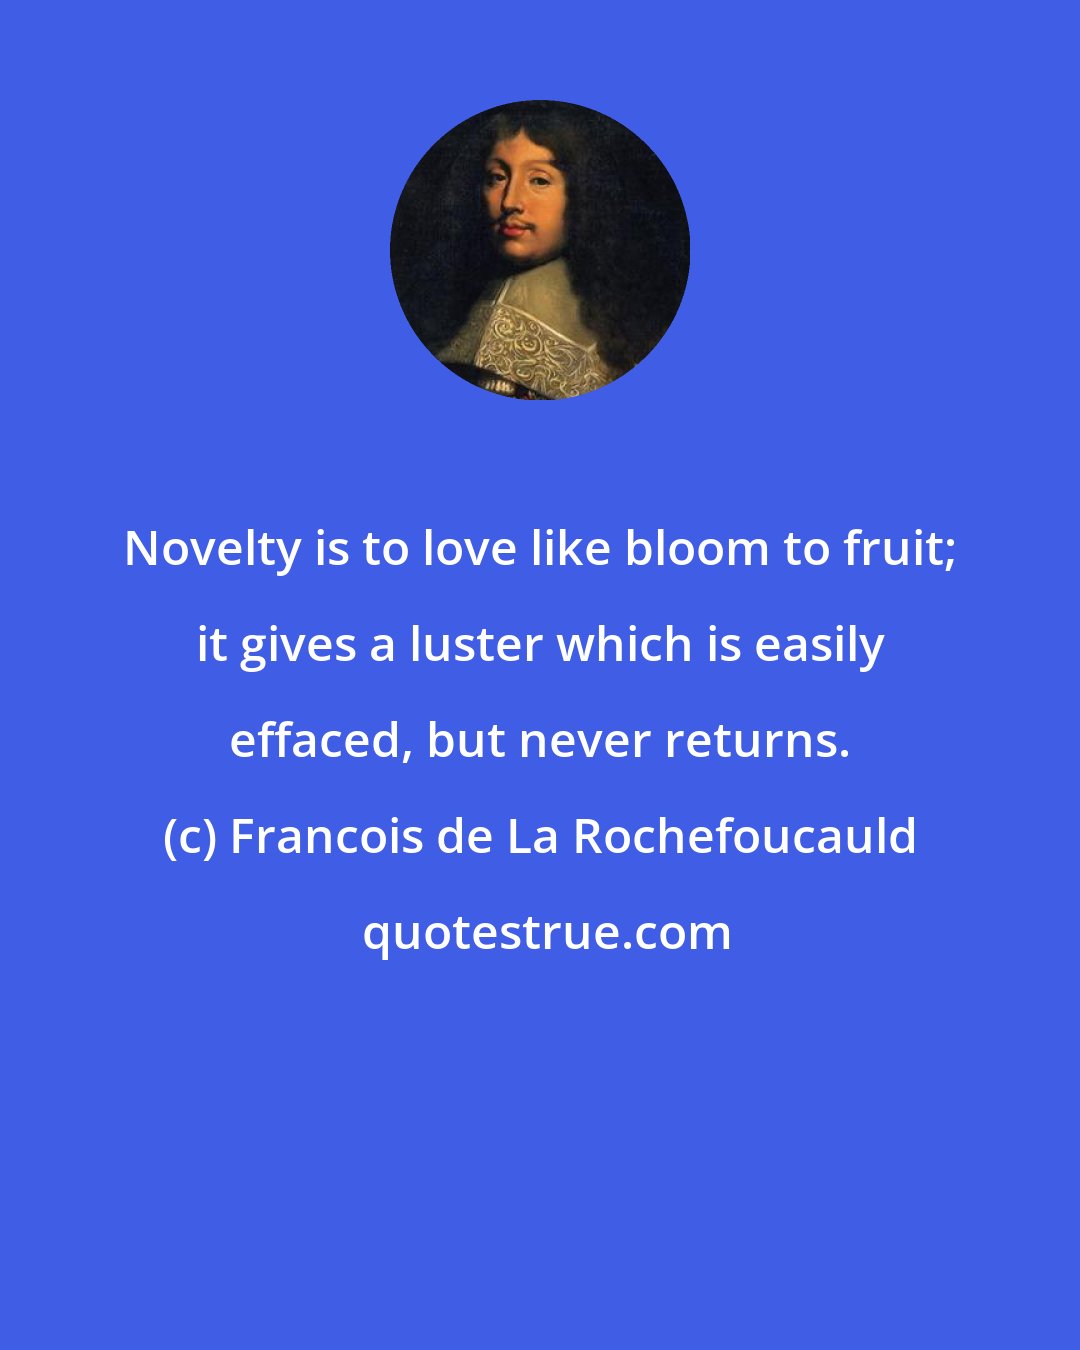 Francois de La Rochefoucauld: Novelty is to love like bloom to fruit; it gives a luster which is easily effaced, but never returns.